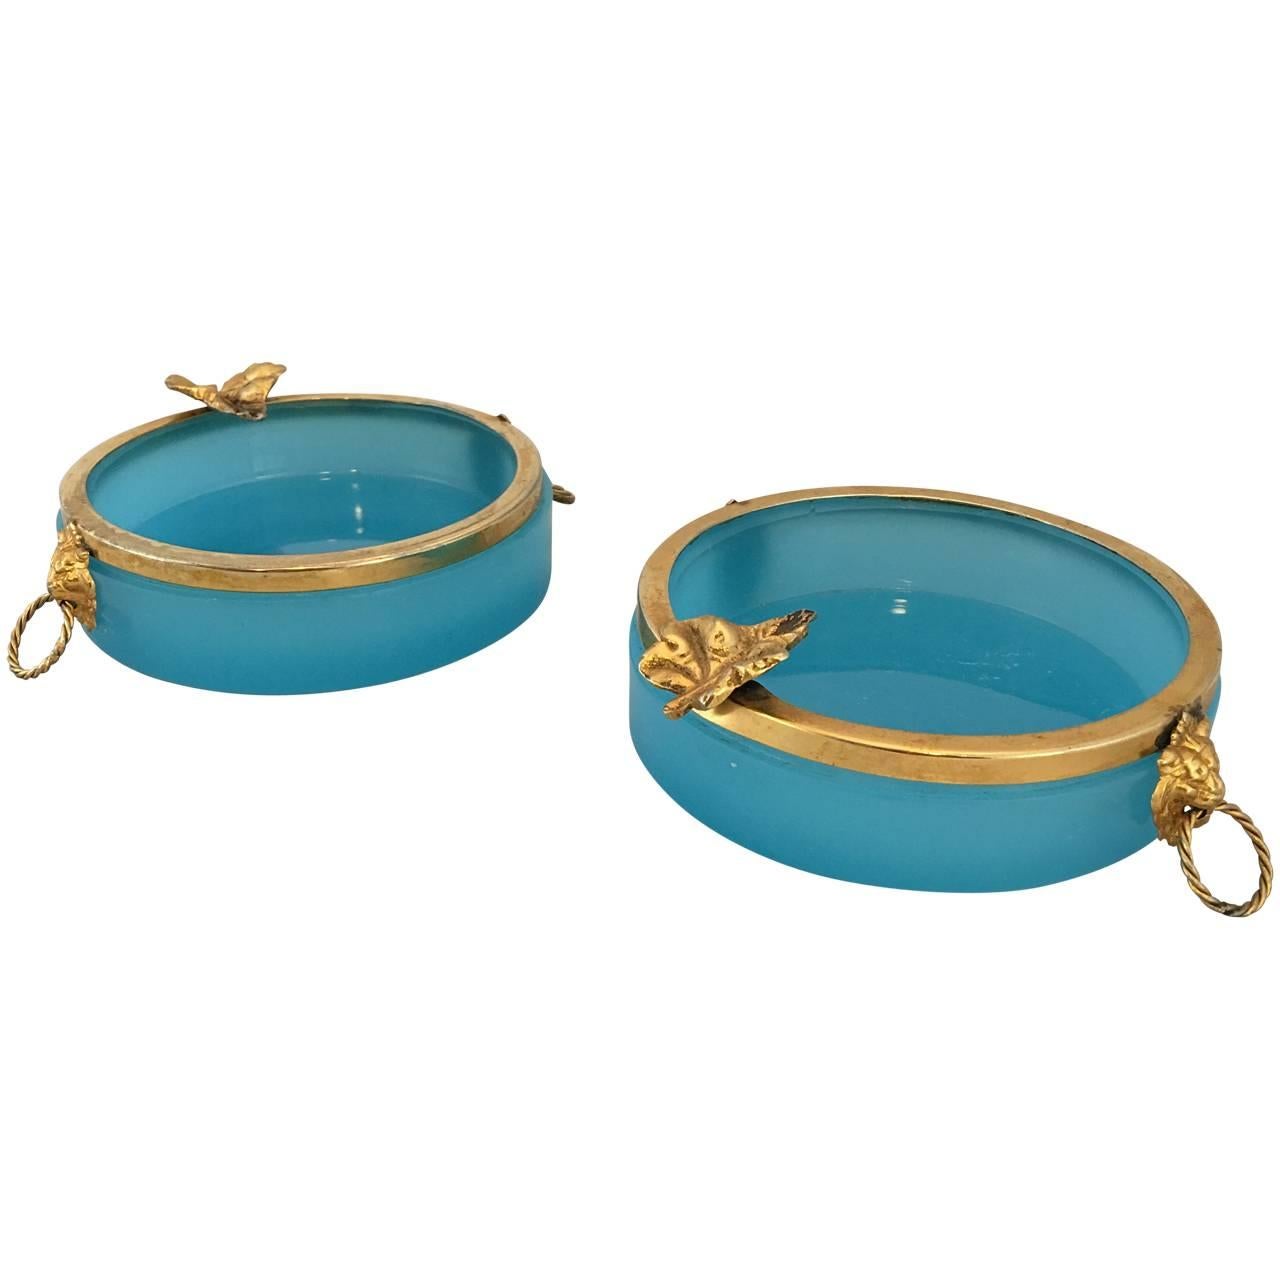 Two blue opaline ash trays with brass edging, lion heads and leaf shelf